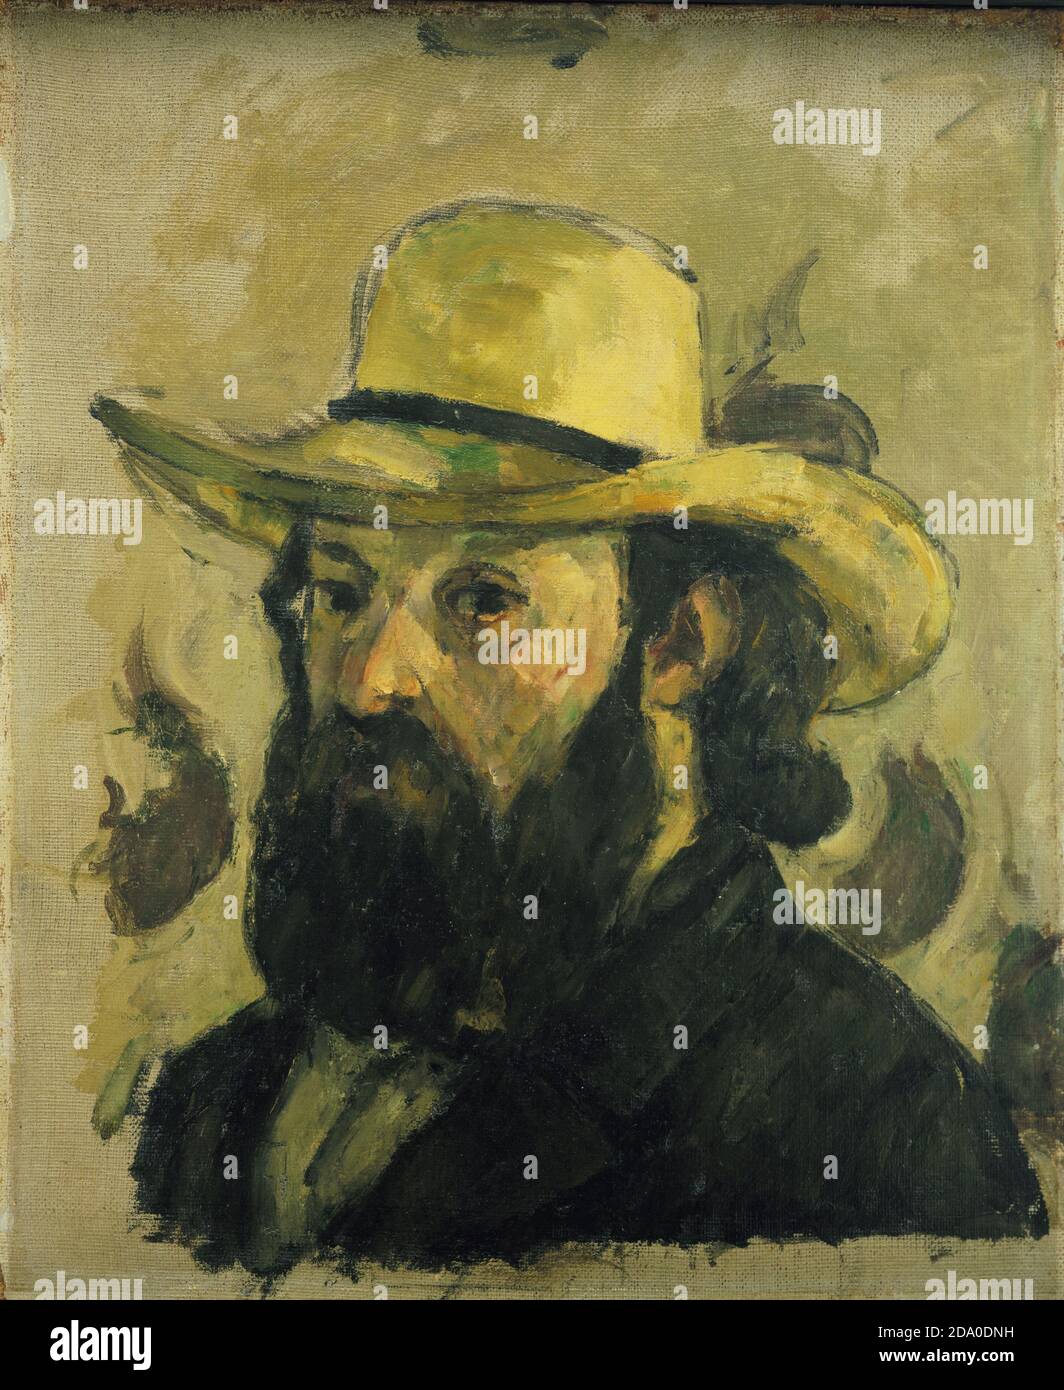 Paul Cézanne. (French, 1839-1906). Self-Portrait in a Straw Hat. 1875-76. Oil on canvas. High resolution painting. Stock Photo